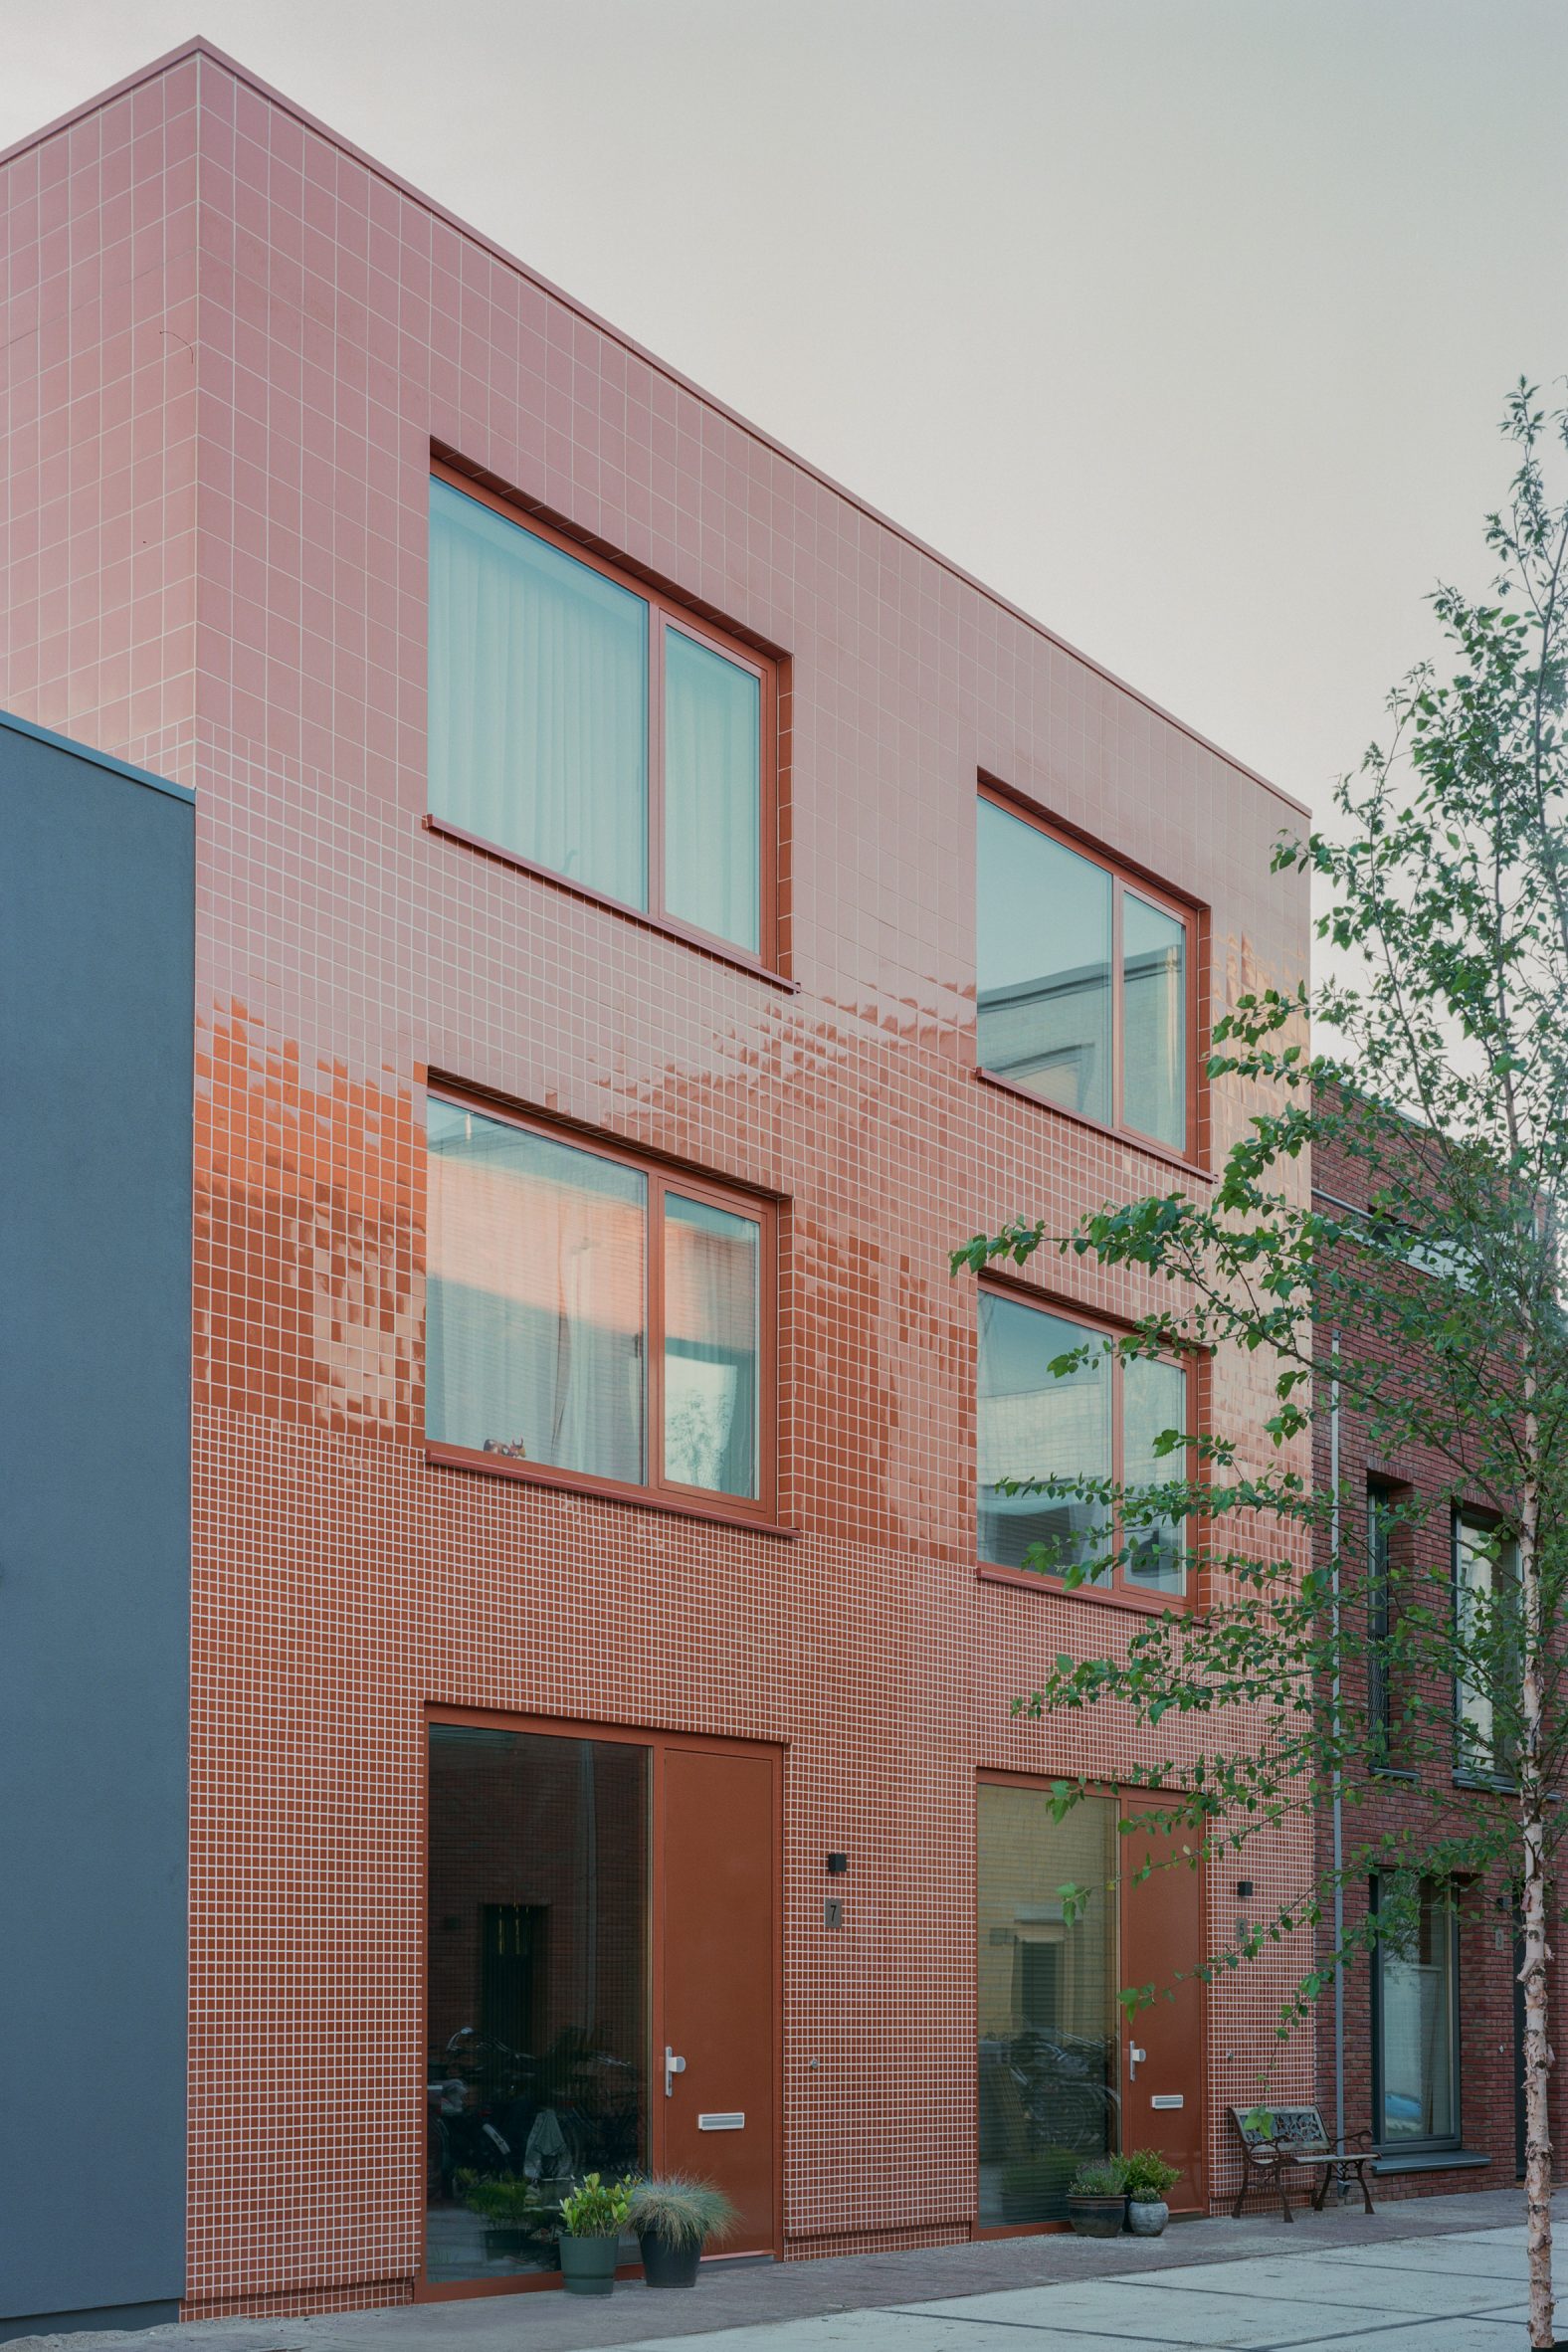 Exterior image of a home in Utrecht with a glazed red tiled facade